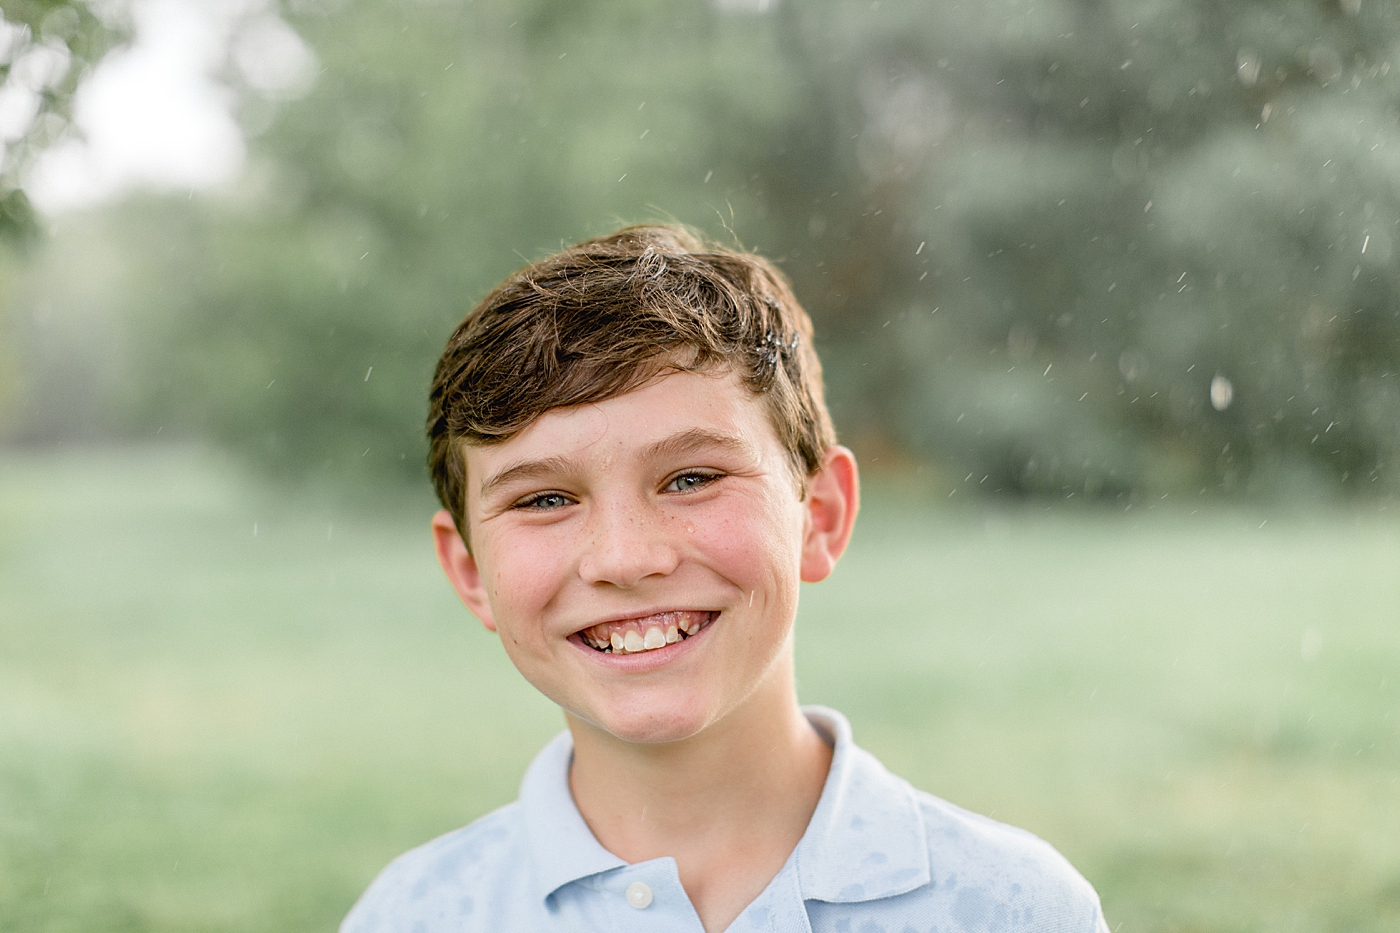 Children's outdoor portrait during the rain. Photo by Brittany Elise Photography.